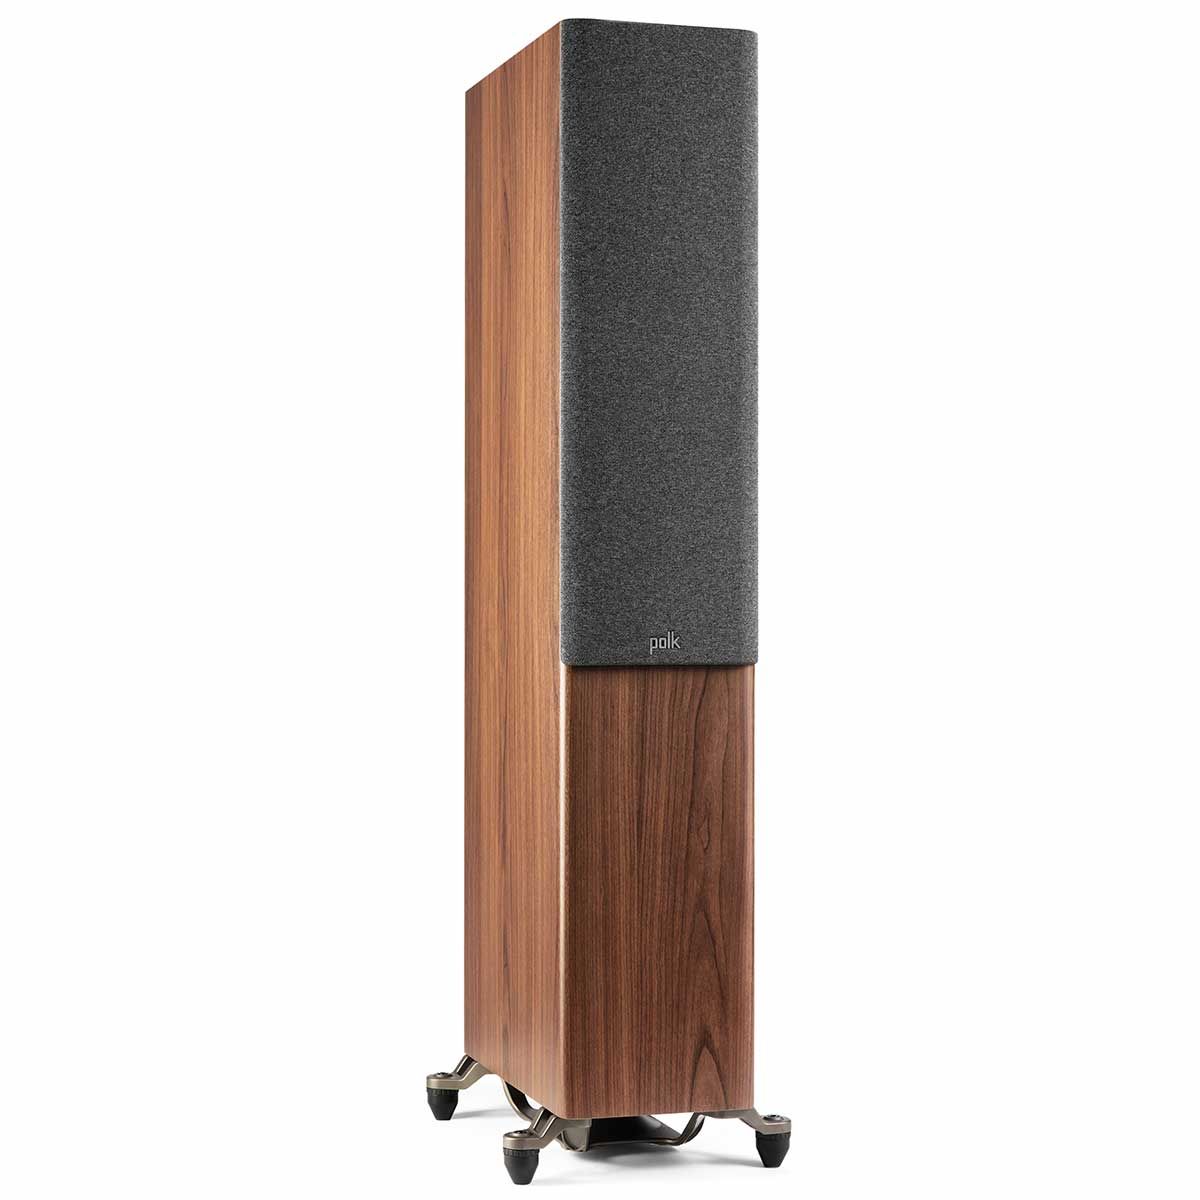 Polk R600 Floorstanding Speaker, Walnut, front right angle with grille